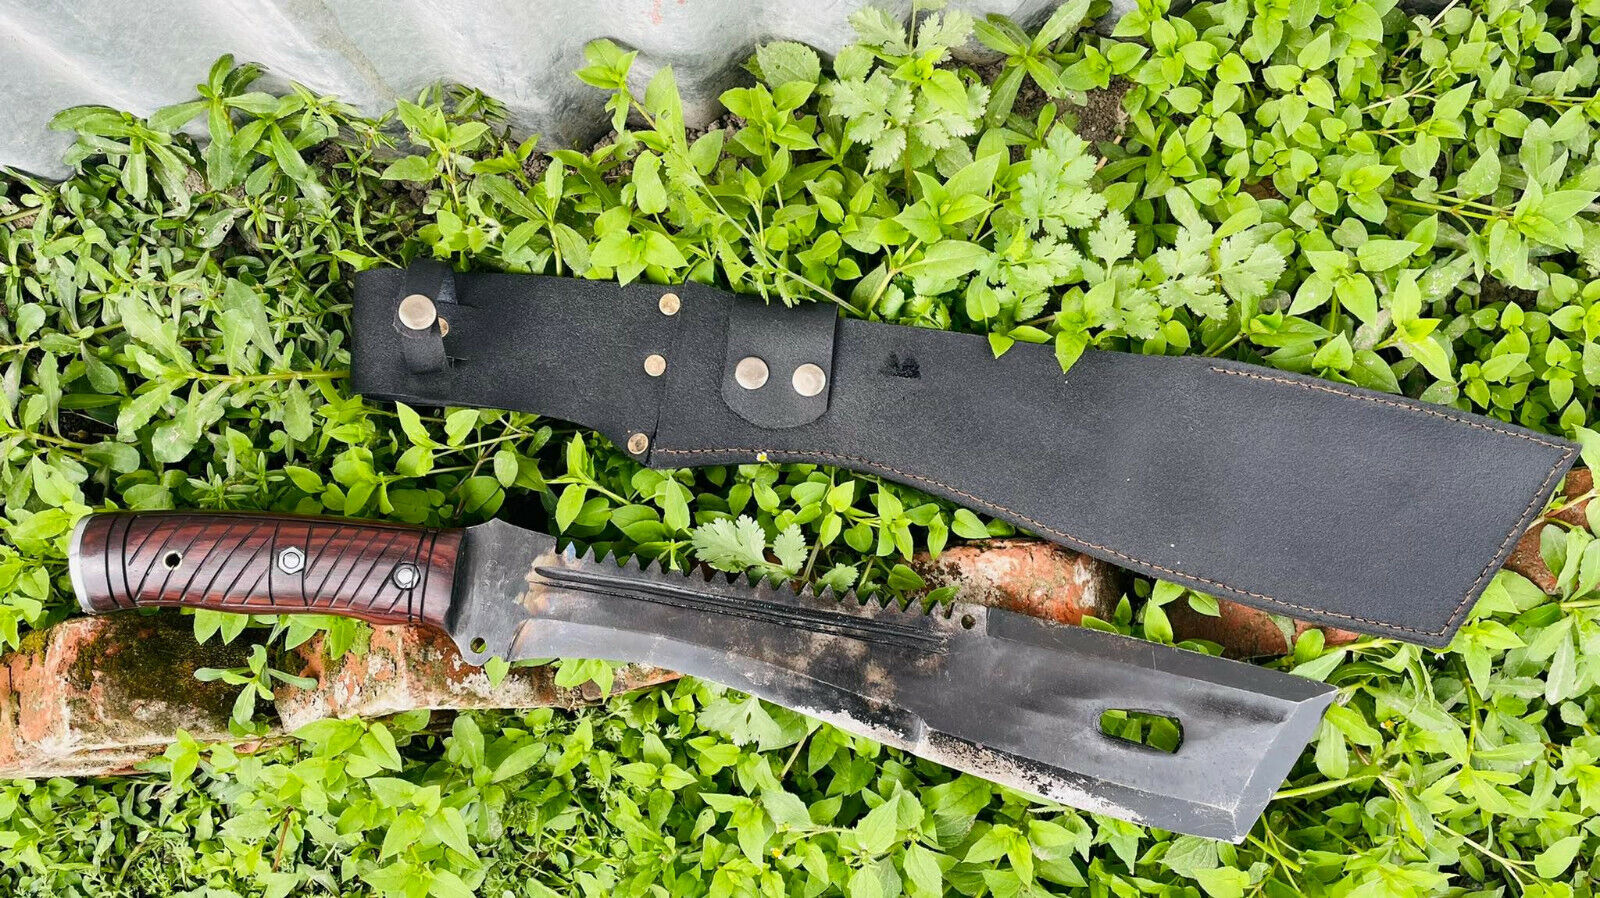 EGKH-15 Inches Field and Camping Tactical Machete for Clearing Brush, Full Tang 